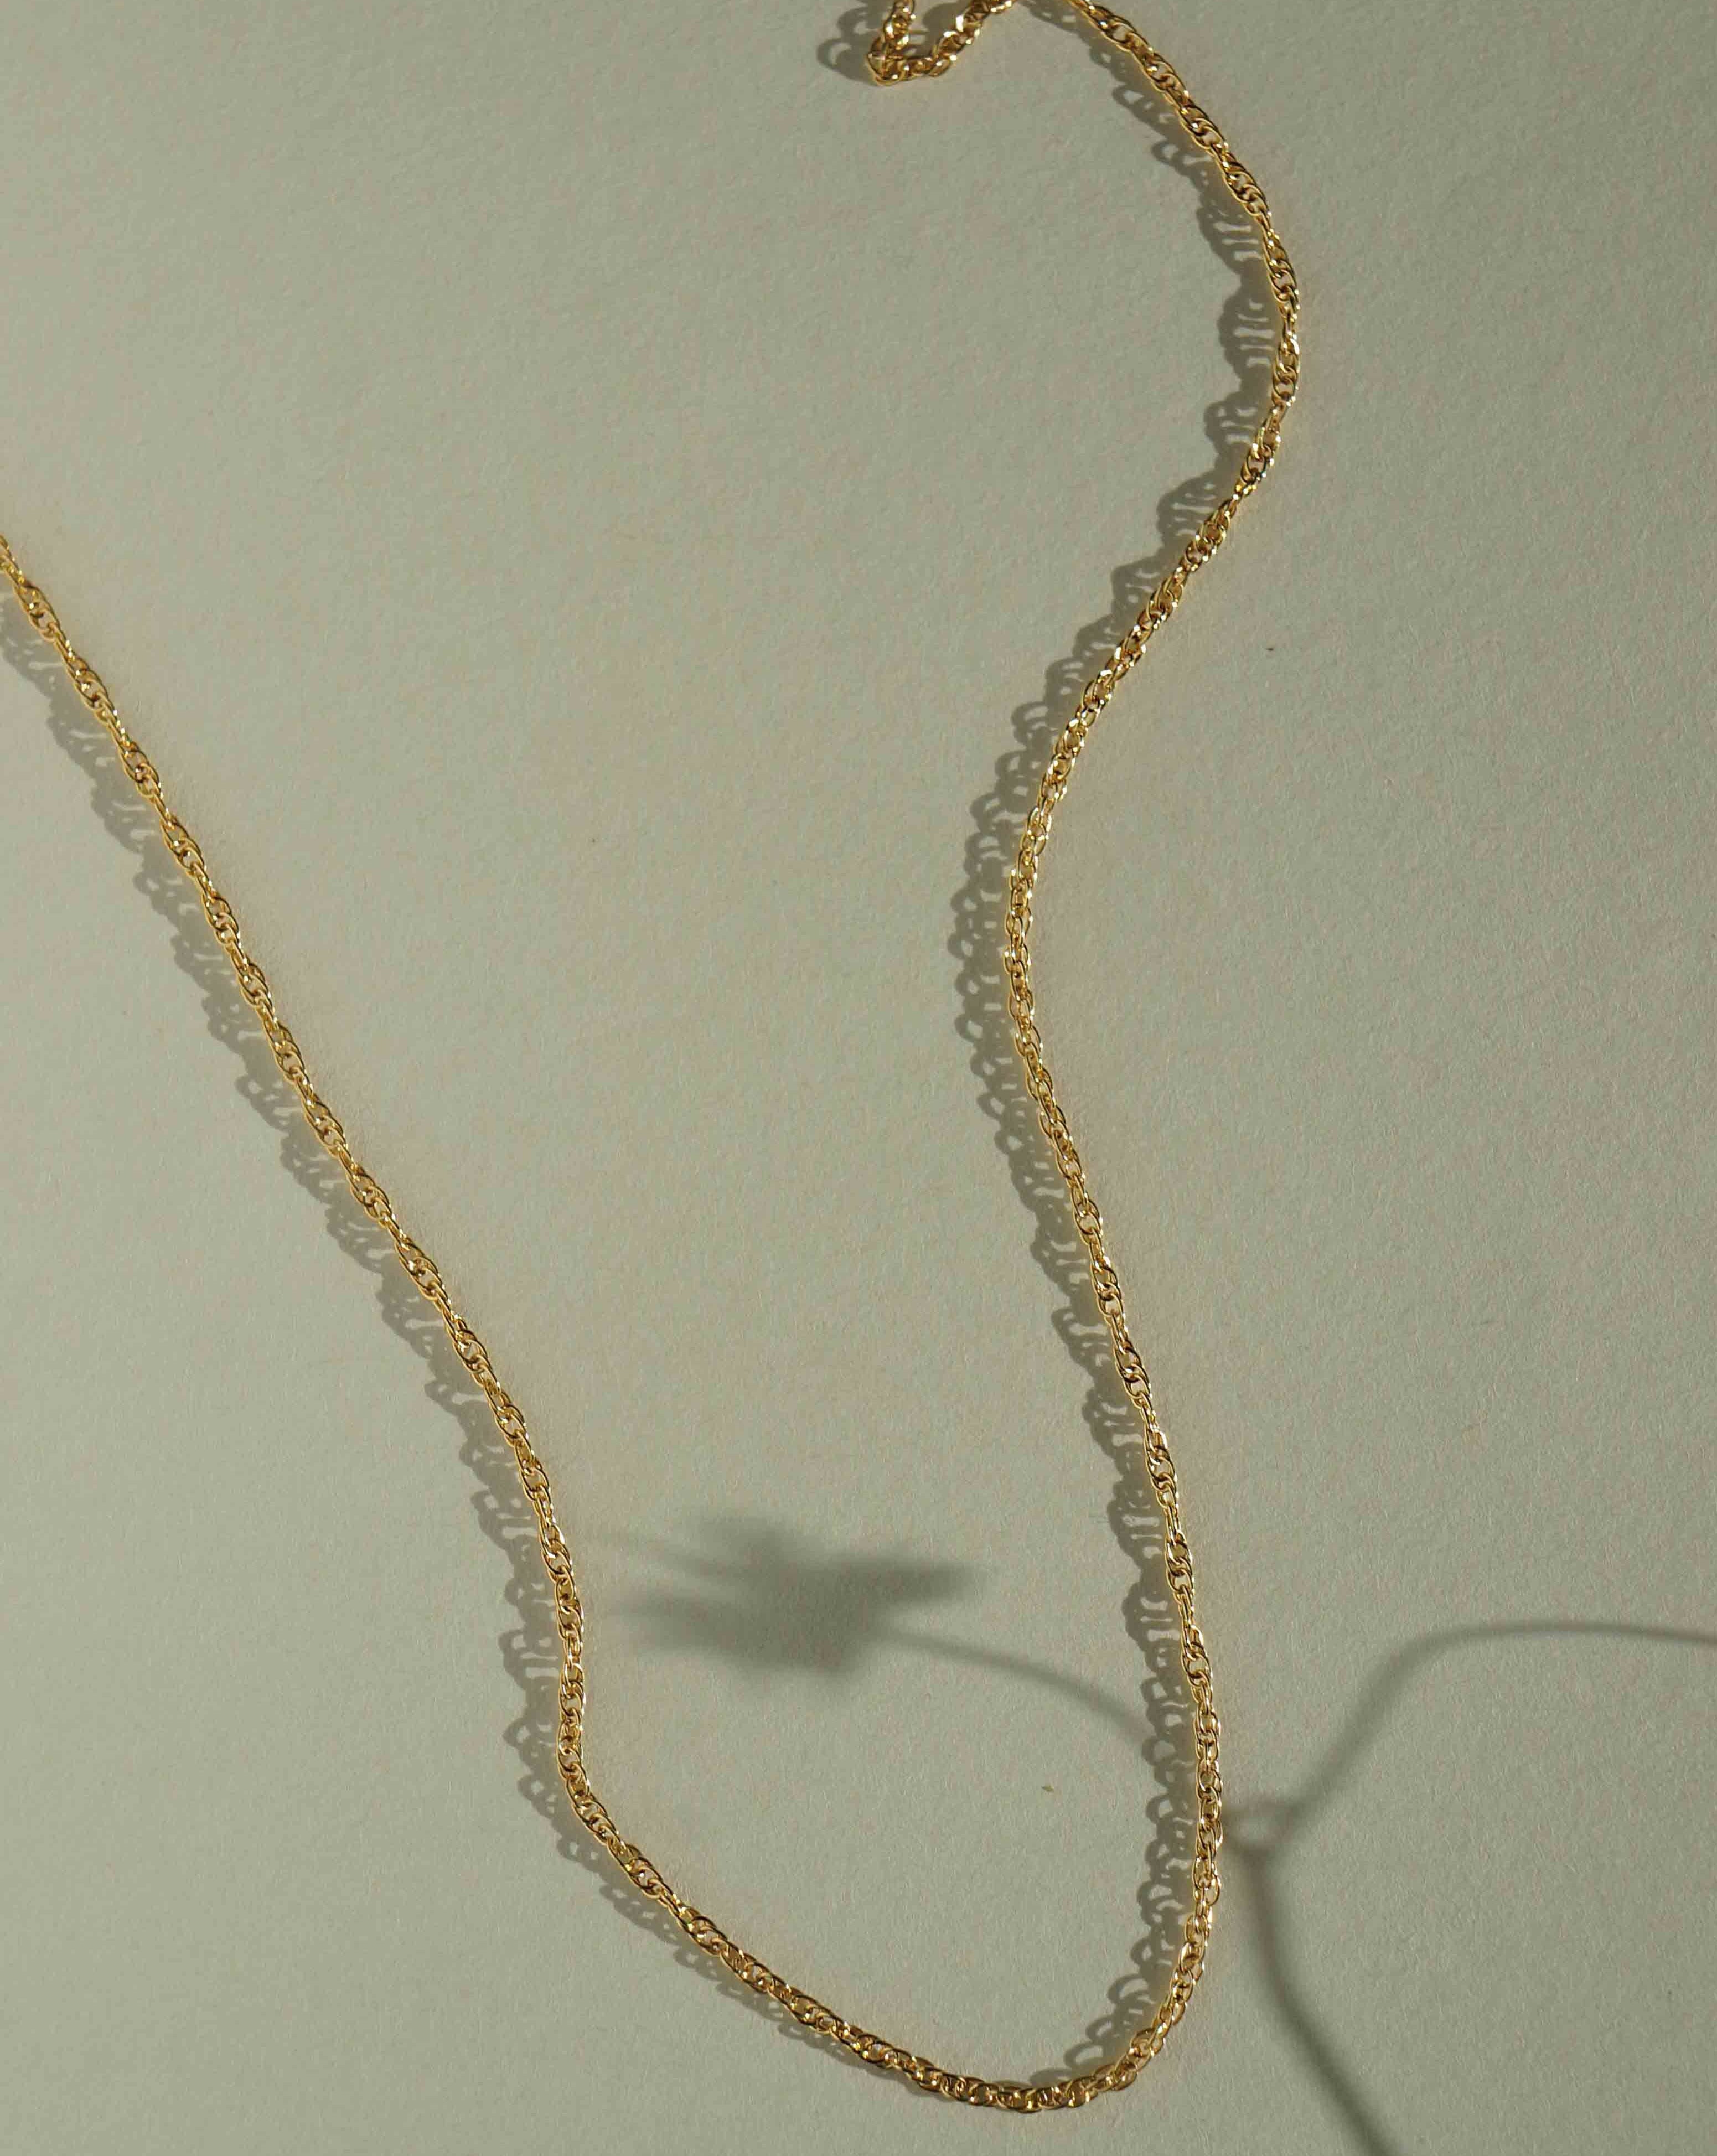 Kali Necklace by KOZAKH. A 14 inch long, 2mm thick twisted rope chain necklace, crafted in 14K Gold Filled.